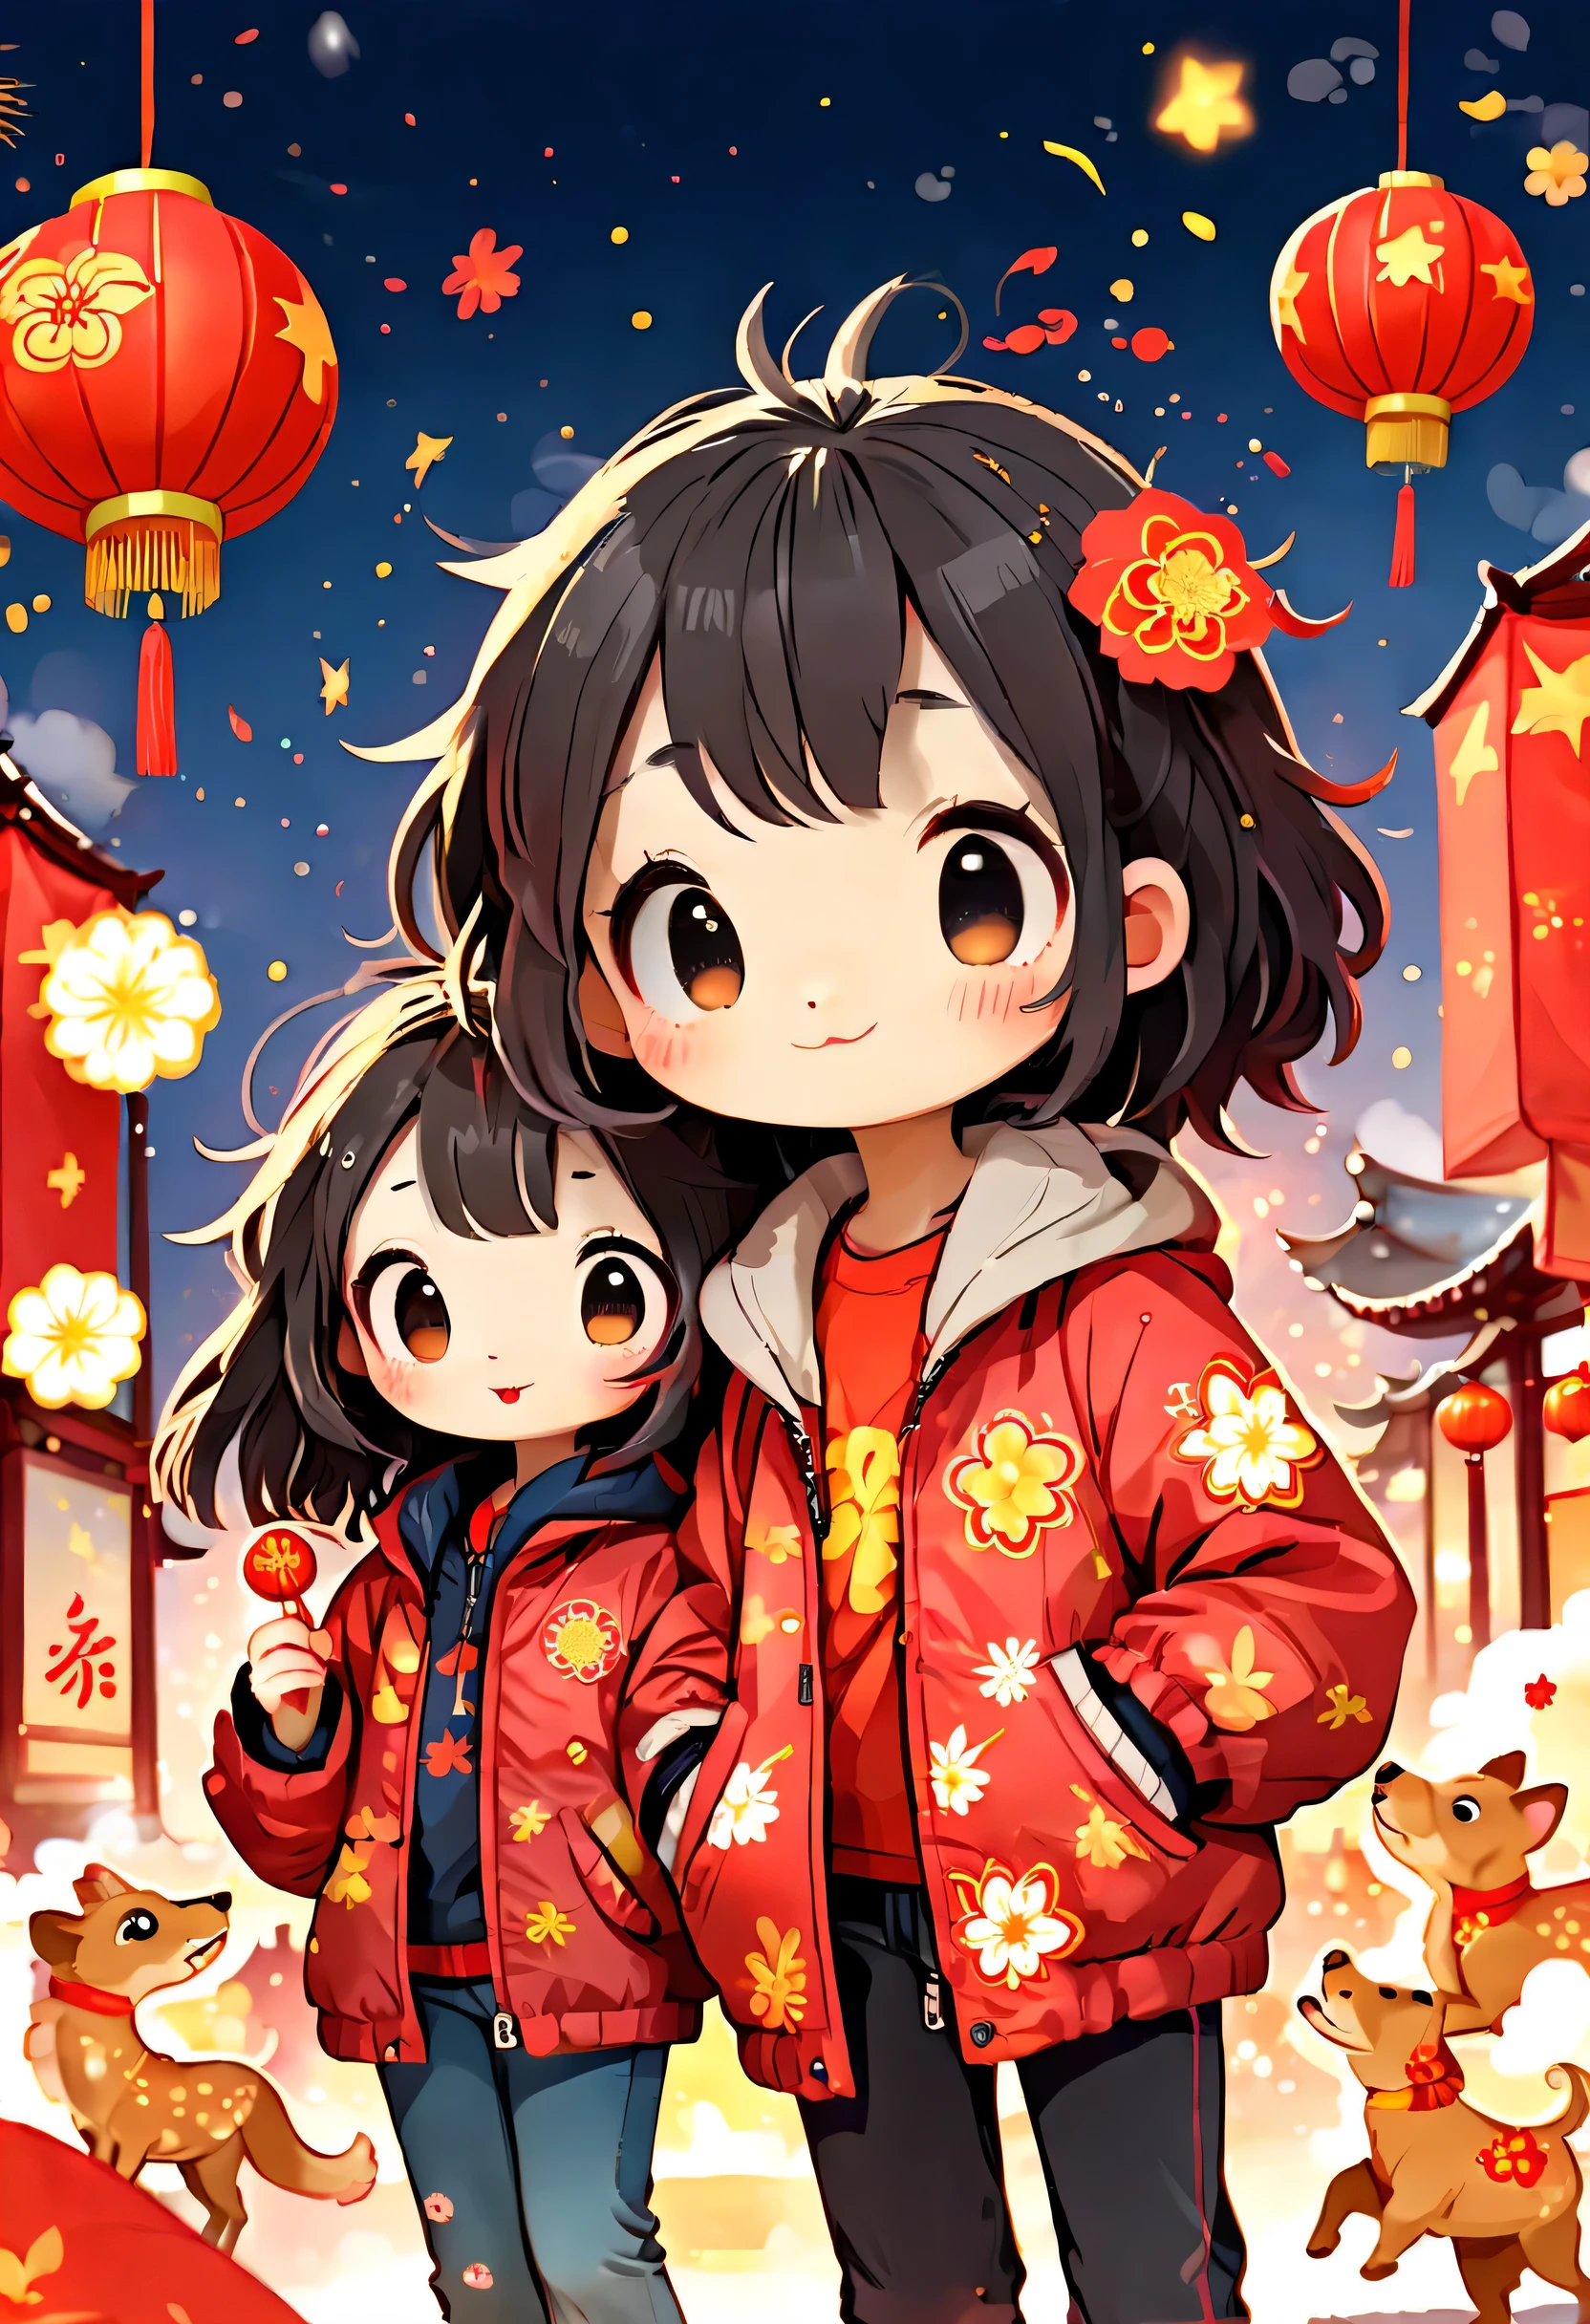 Children&#39;s books, (Tim Burton style)，(Illustrations capture the essence of Chinese New Year)，(Modern town:1.2), (Lanterns and festoons)，It's snowing，In the joyful atmosphere of the New Year，(5 children wearing down jackets set off firecrackers)，(There are many fireworks in the sky)，the picture was beautiful，(Detailed and vivid children&#39;Hand drawn illustrations)，Show people&#39;s expressions